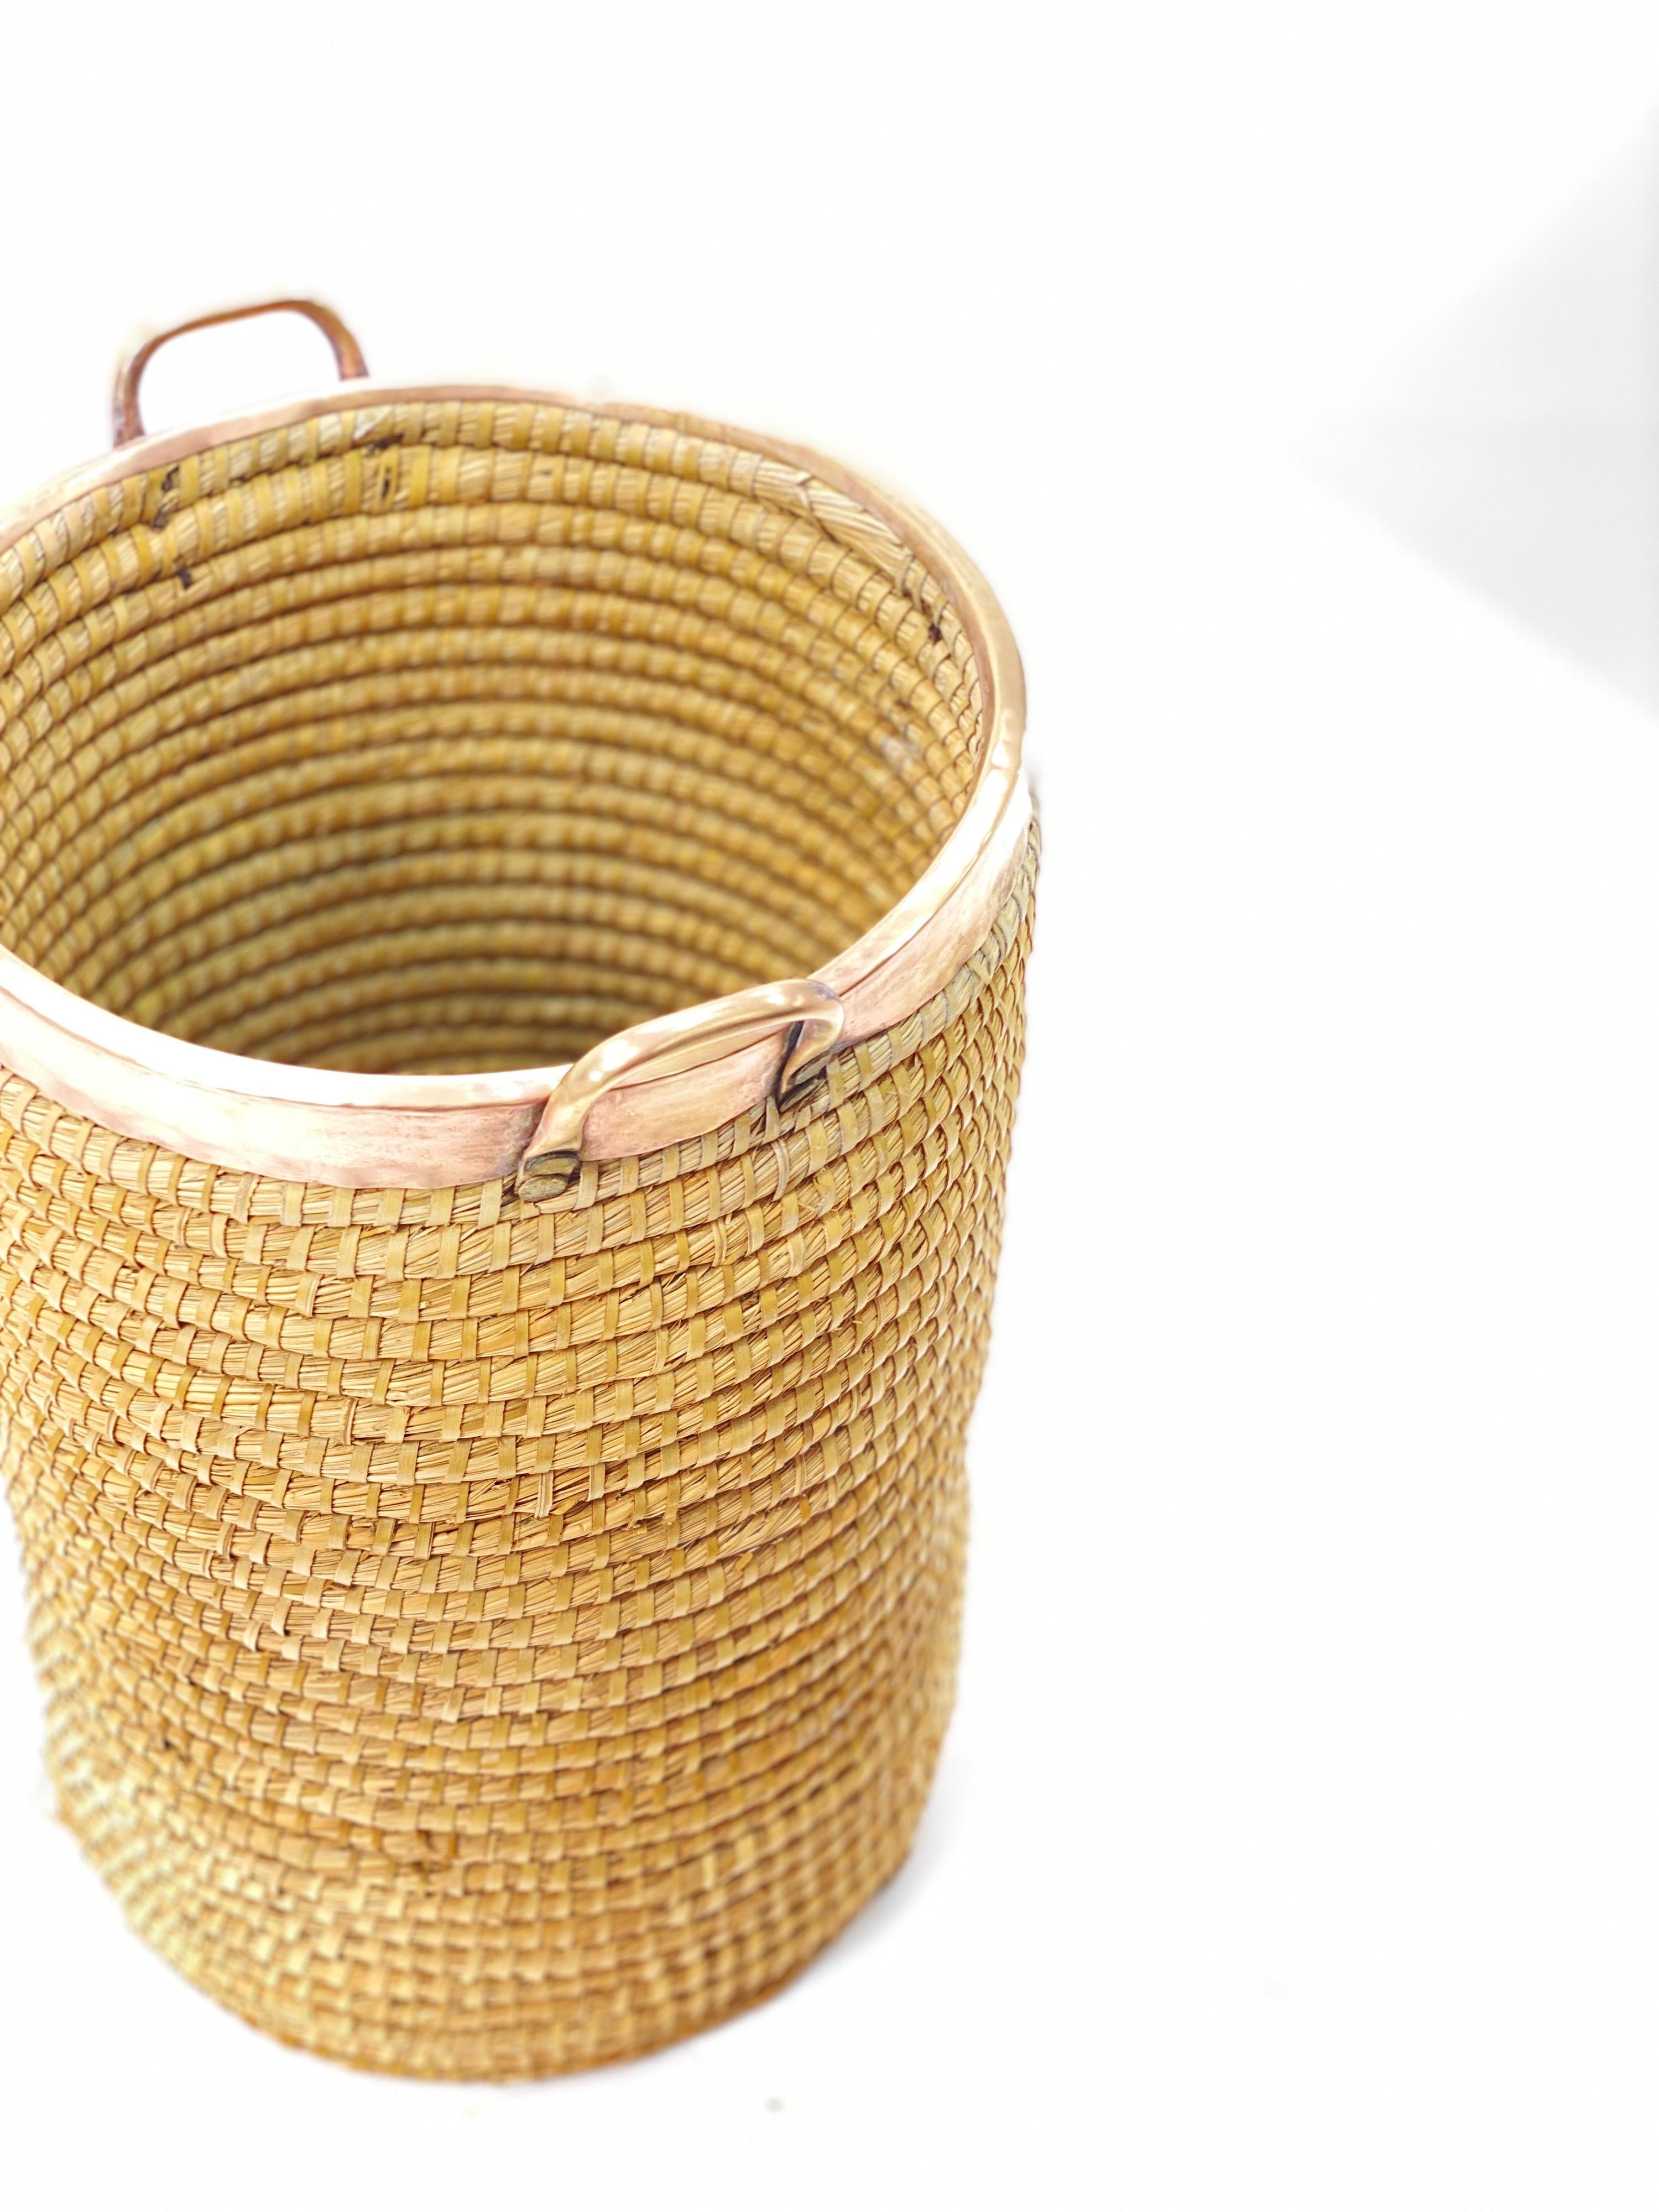  Basket in Rattan, Cooper and Brass, Italy, 1970 For Sale 1